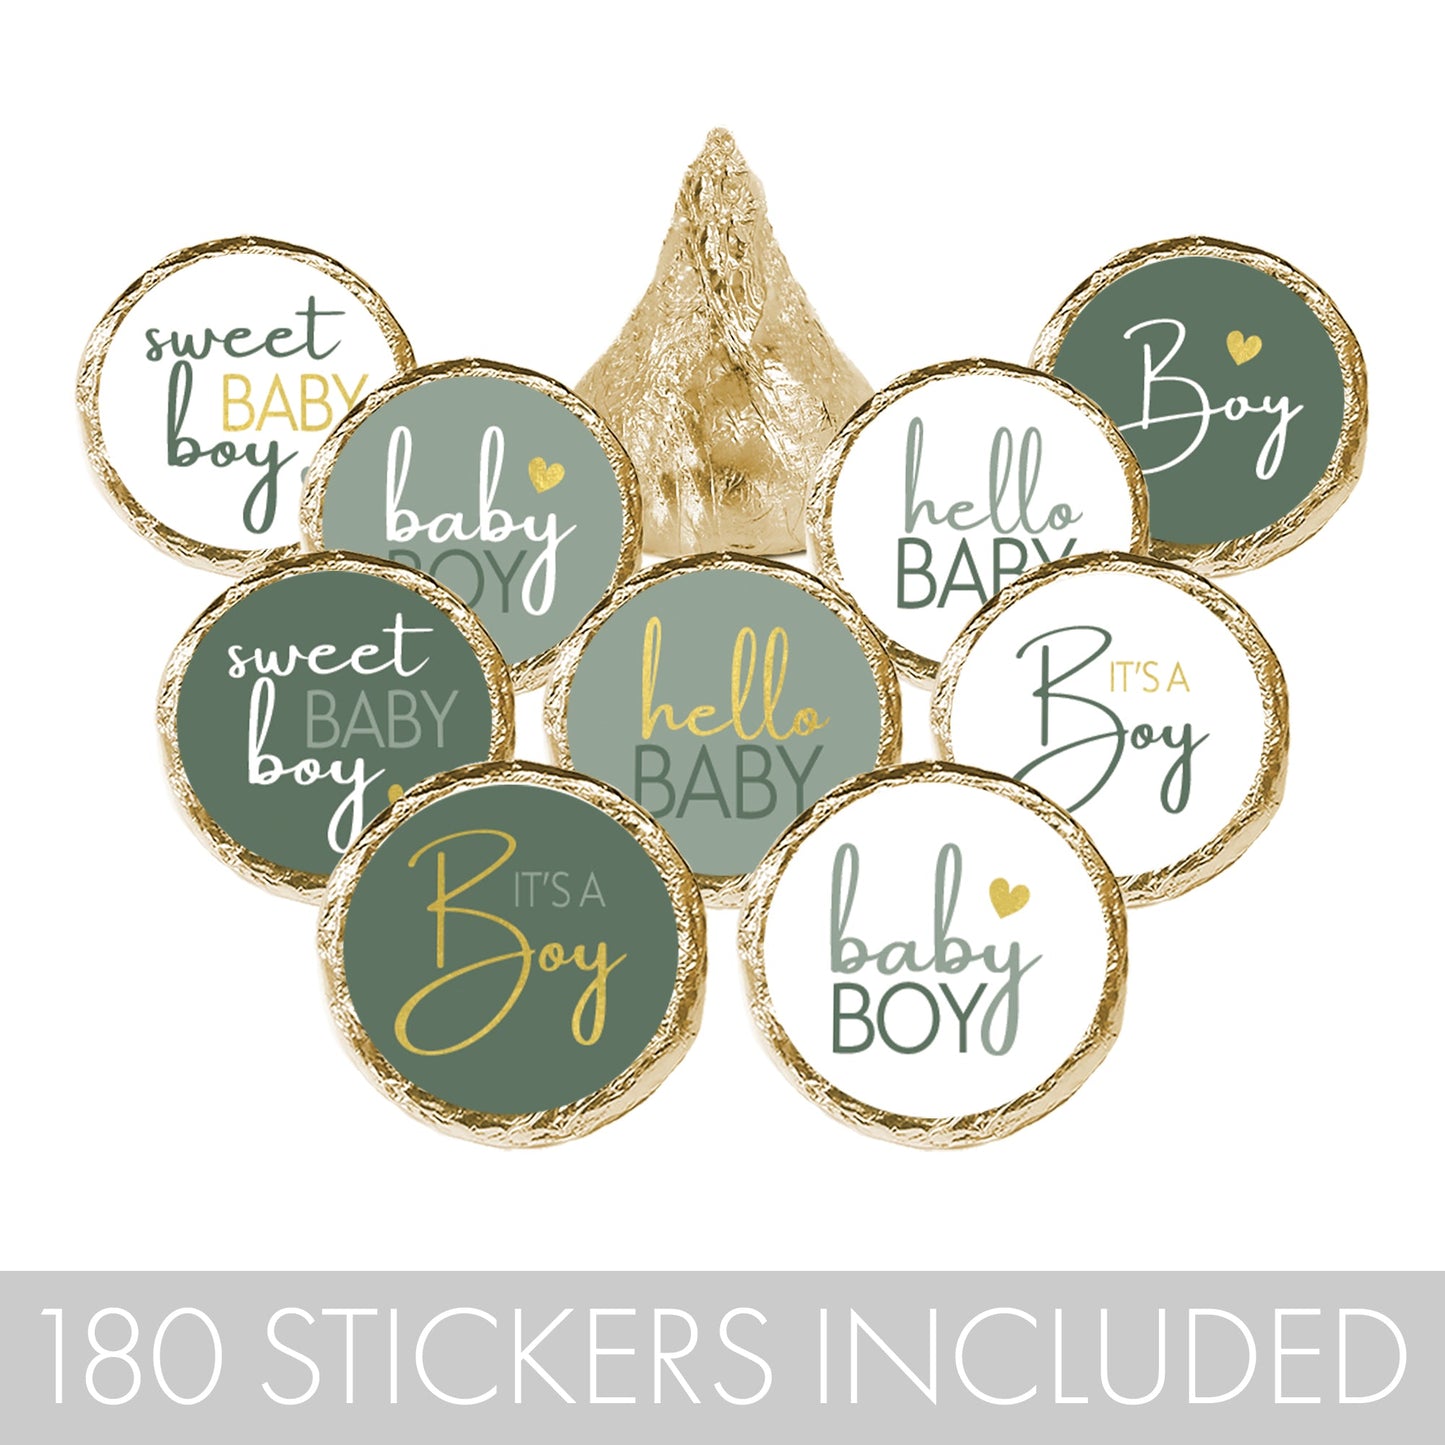 Sweet Baby Boy: Green -  It’s a Boy Baby Shower Party Favor Stickers -180 Stickers